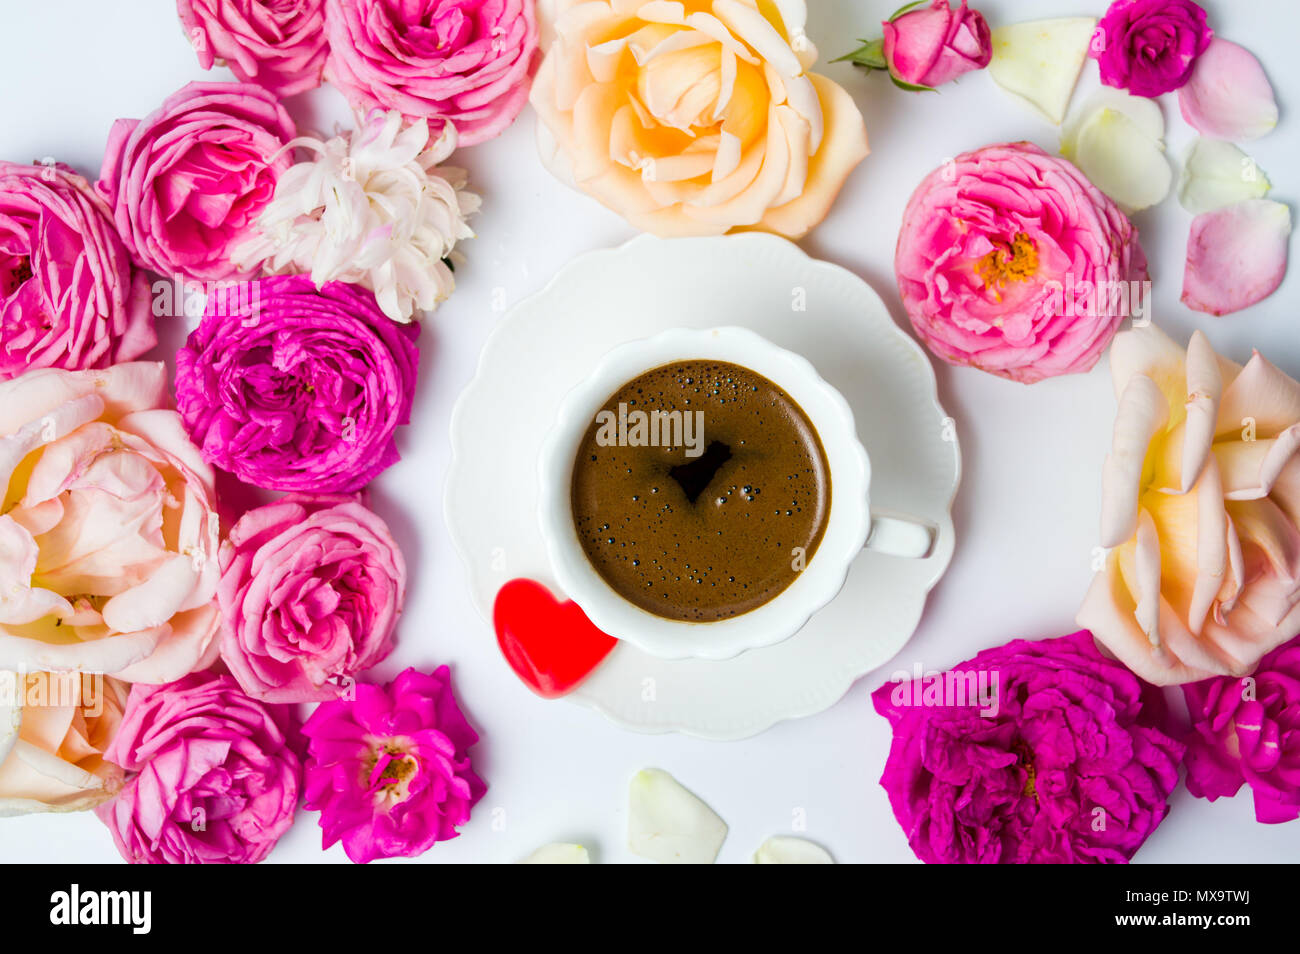 Colorful roses arrangement with a cup of coffee Stock Photo